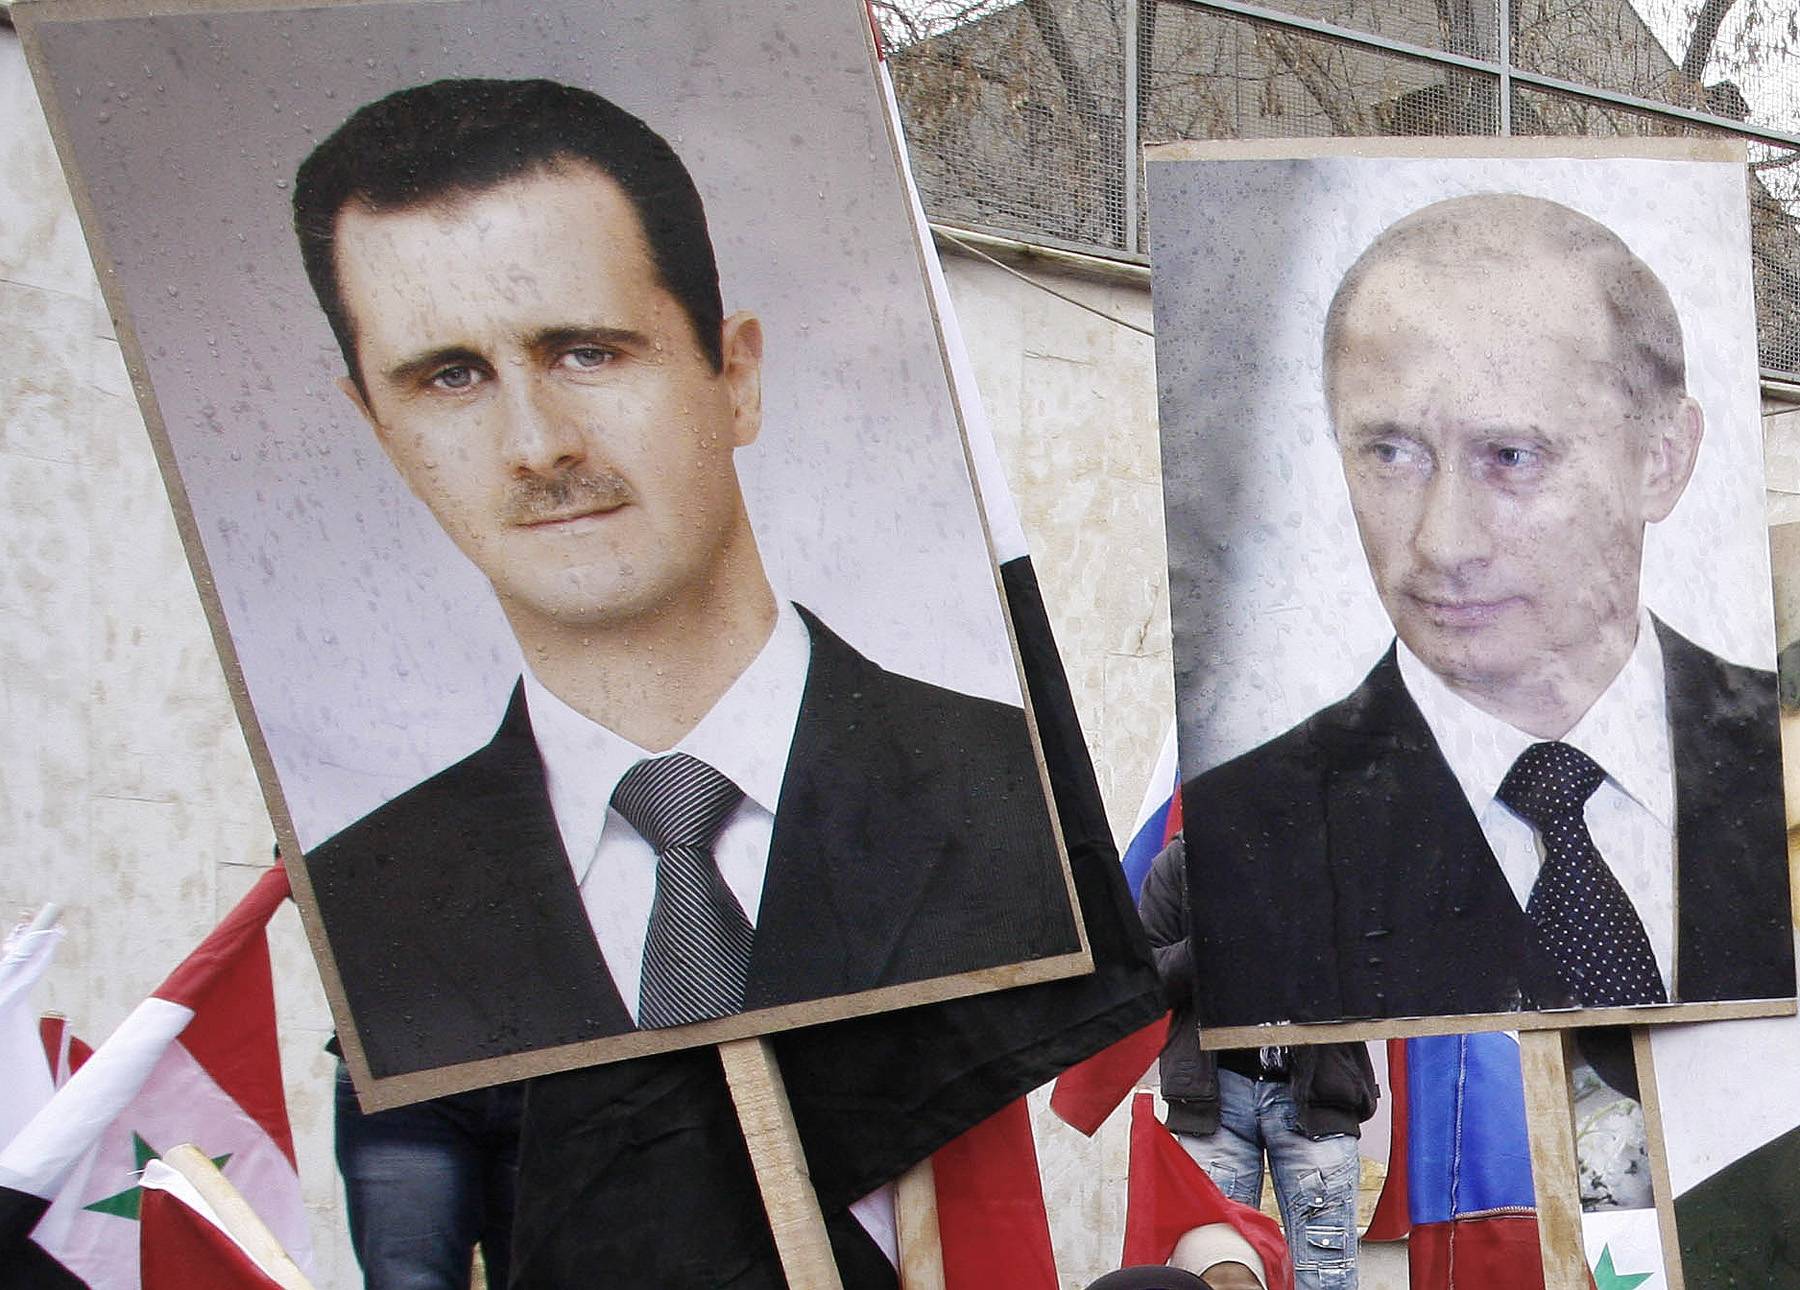 Assad Was Moved by Putin, Not Obama